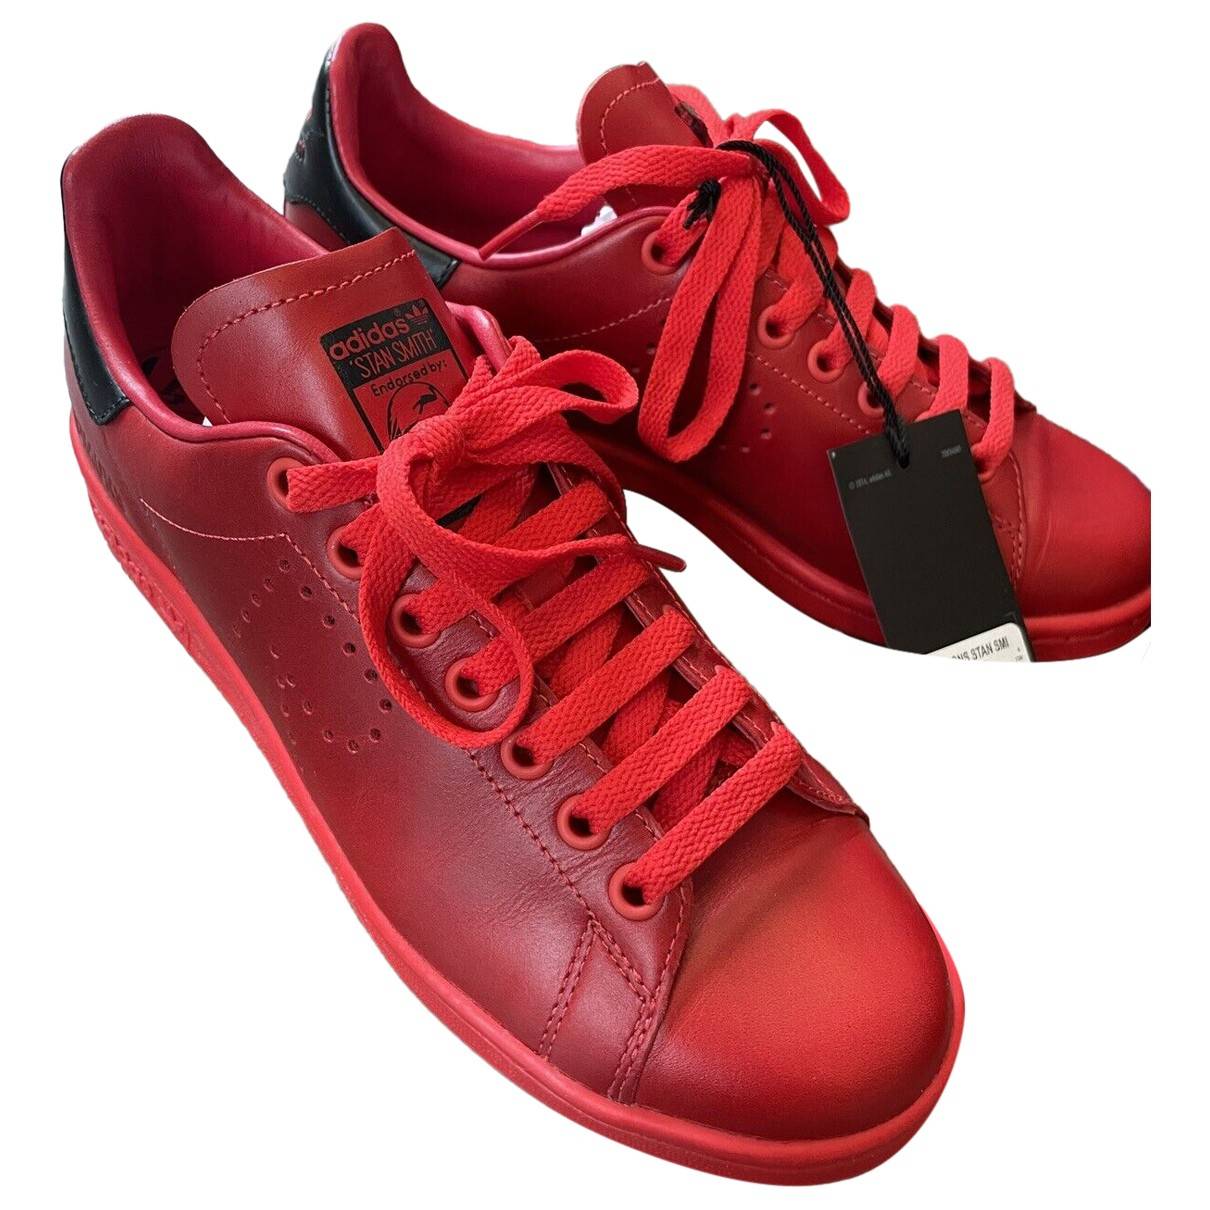 Stan smith leather low trainers Adidas x Raf Simons Red size 6 UK Leather -